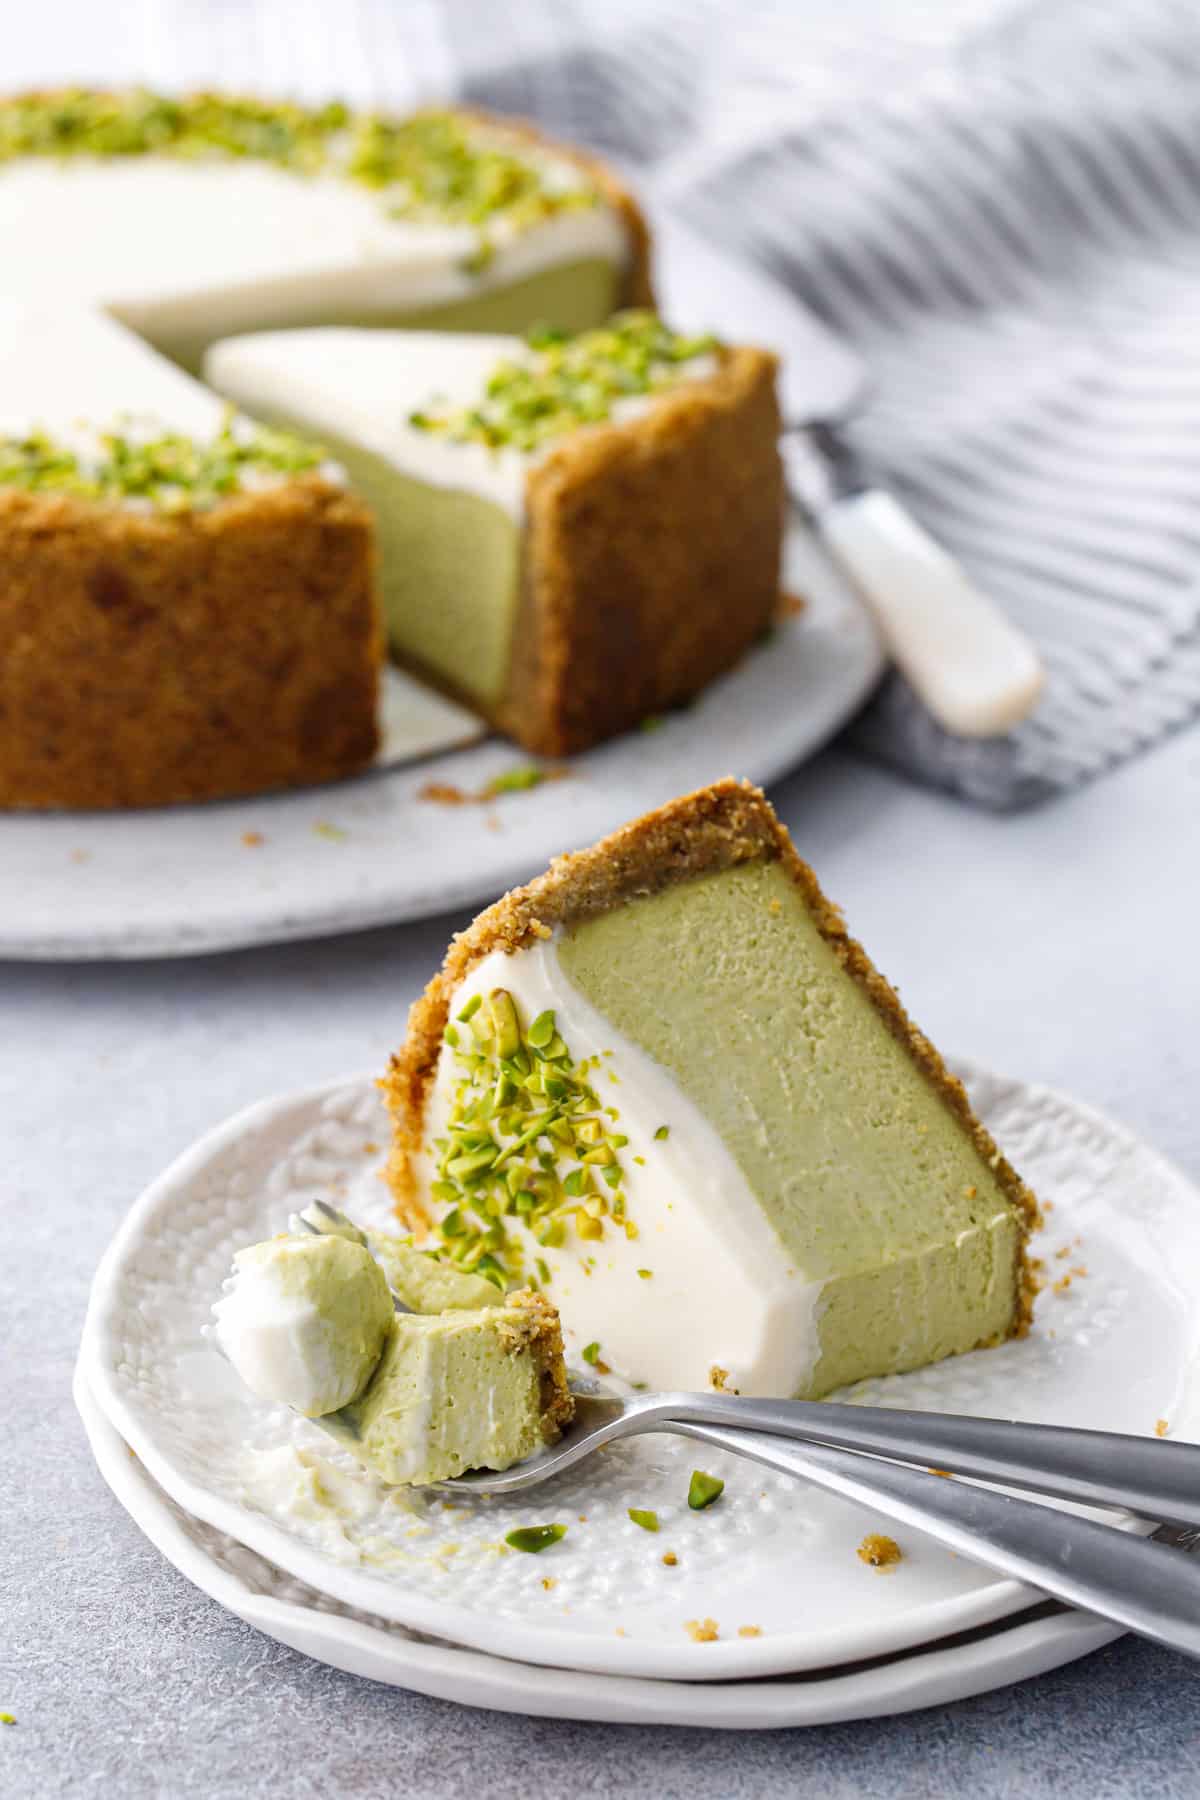 Slice of Pistachio Sour Cream Cheesecake on its side on a white plate, with two forks and a bite of cheesecake, full cheesecake in the background.